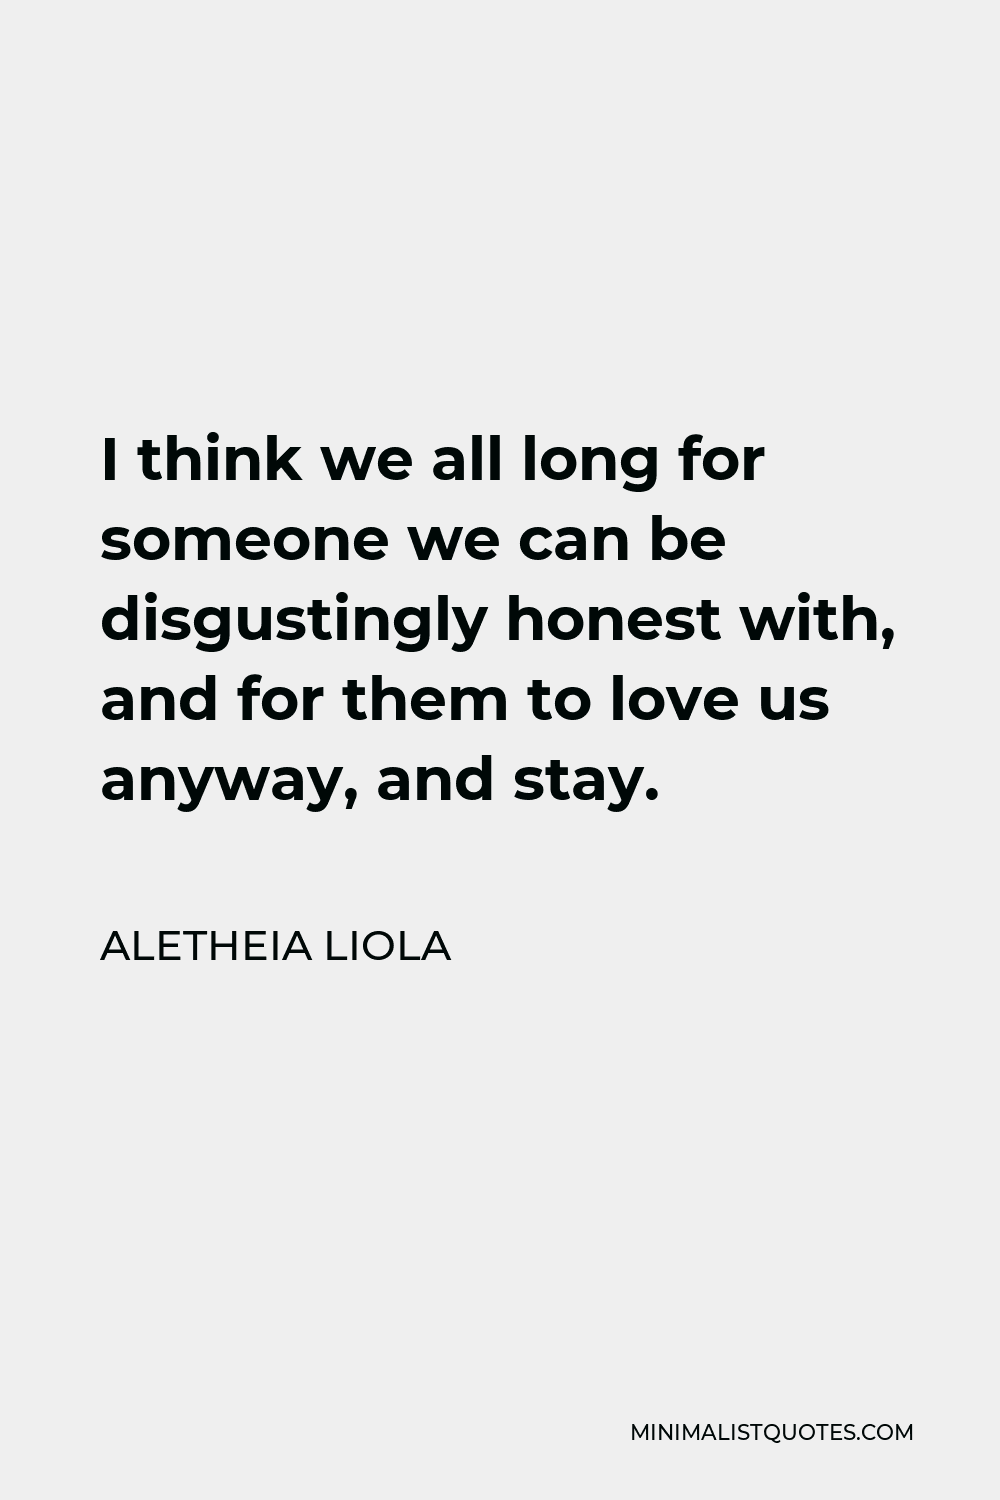 Aletheia Liola Quote - I think we all long for someone we can be disgustingly honest with, and for them to love us anyway, and stay.